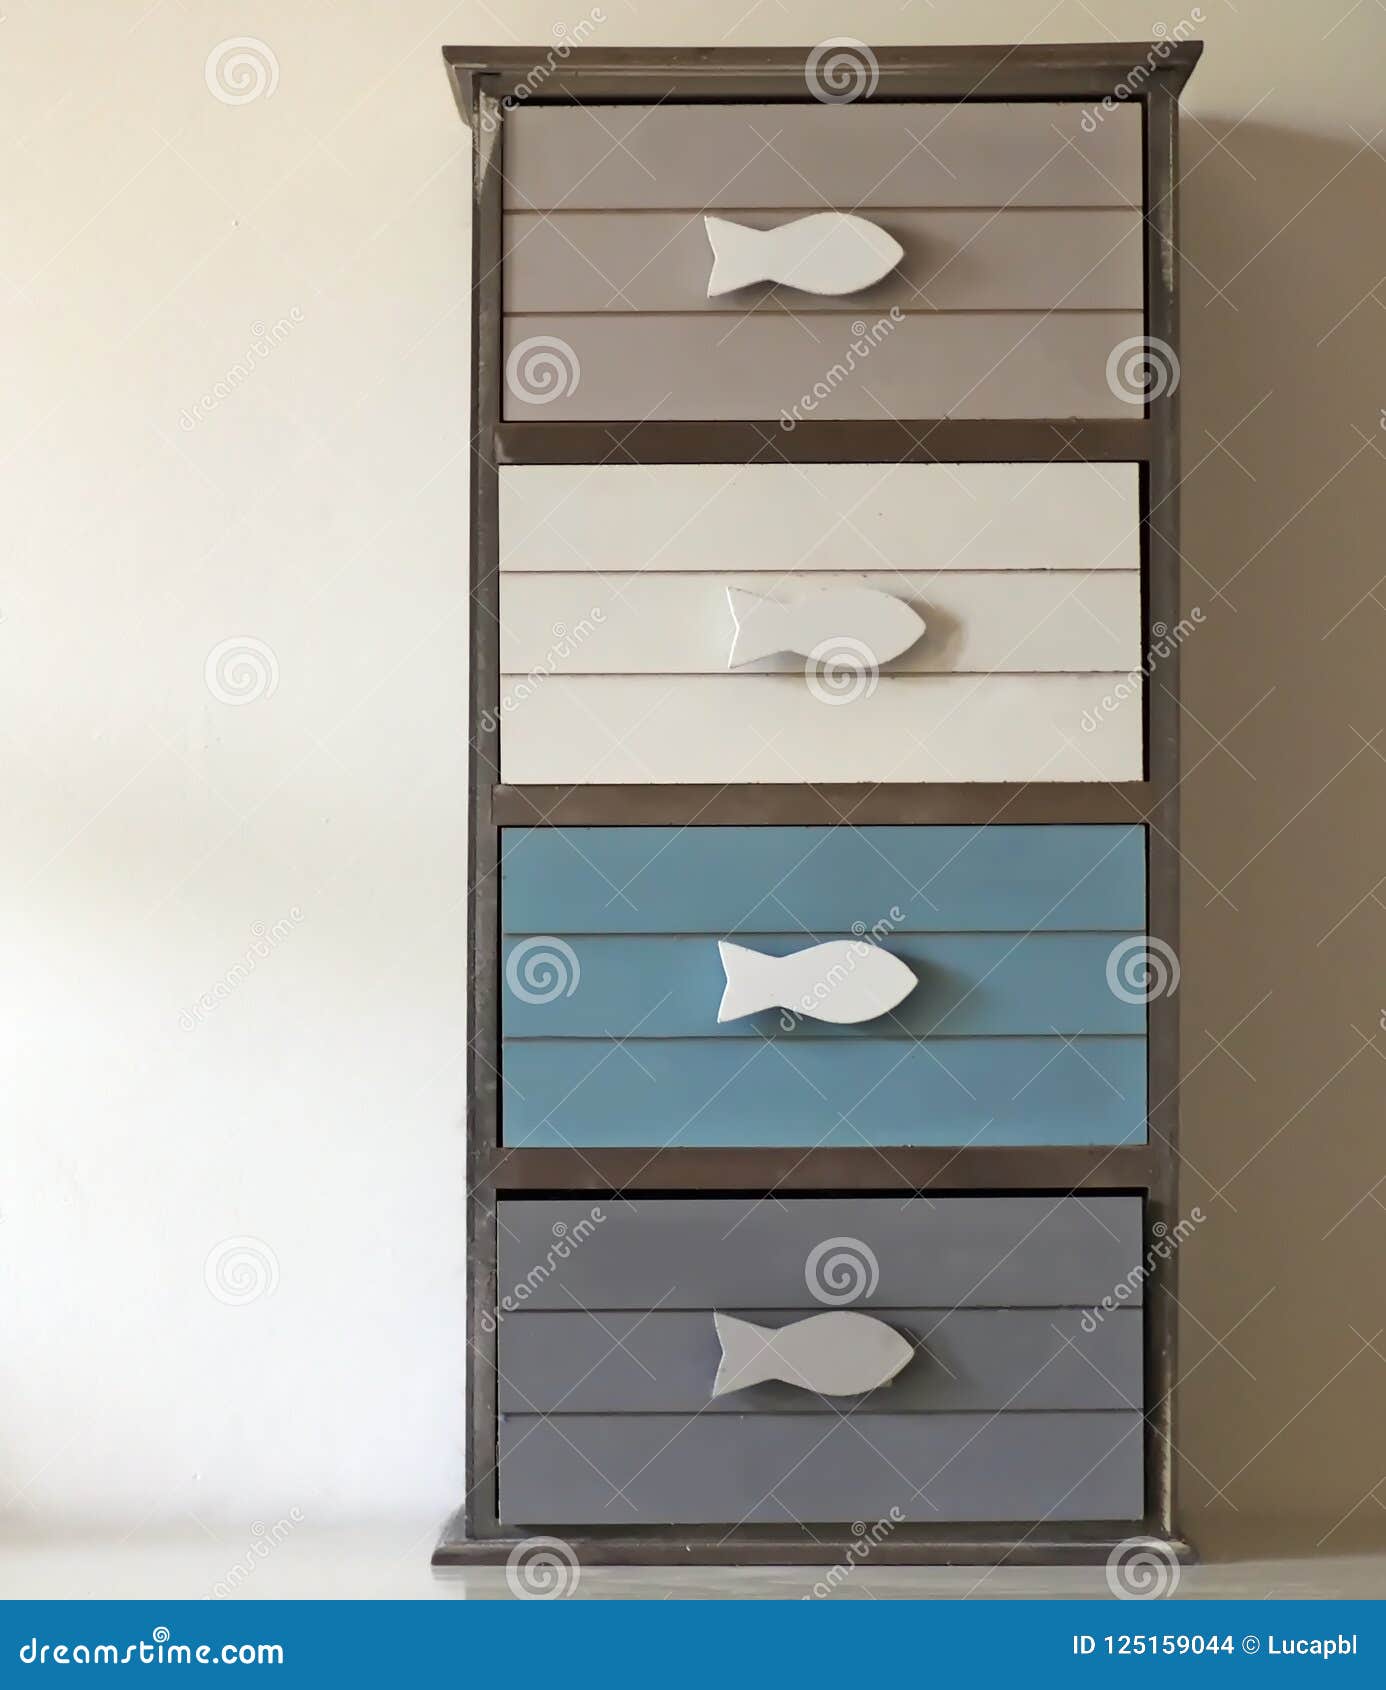 Small Chest Of Drawers With Fish Shaped Handles And Four Drawers